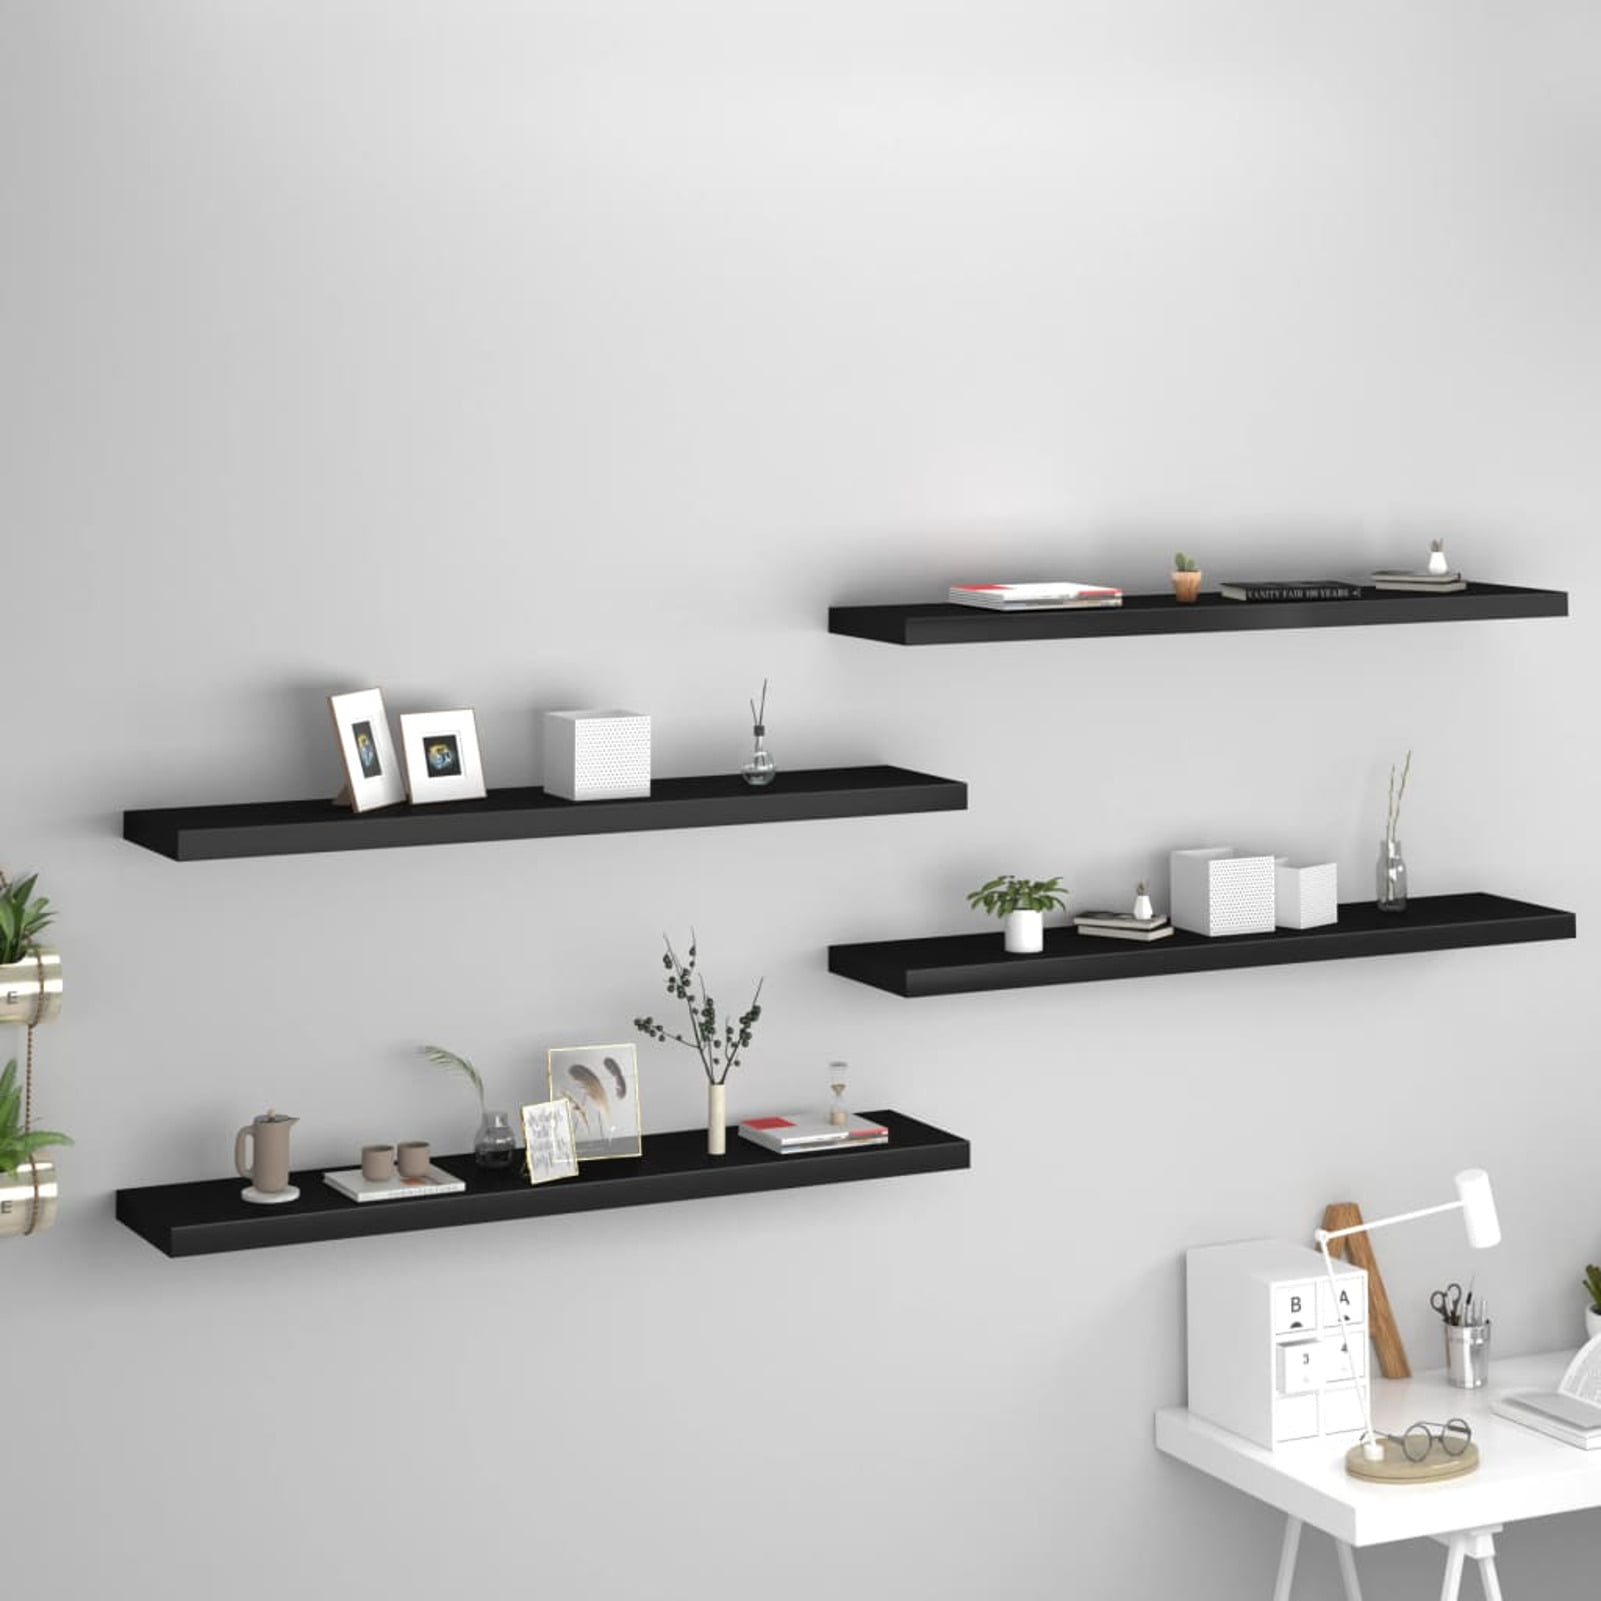 Details about   Wall Mount Shelf Set Of 4 Floating Display Home Decor White Shelves Furniture 